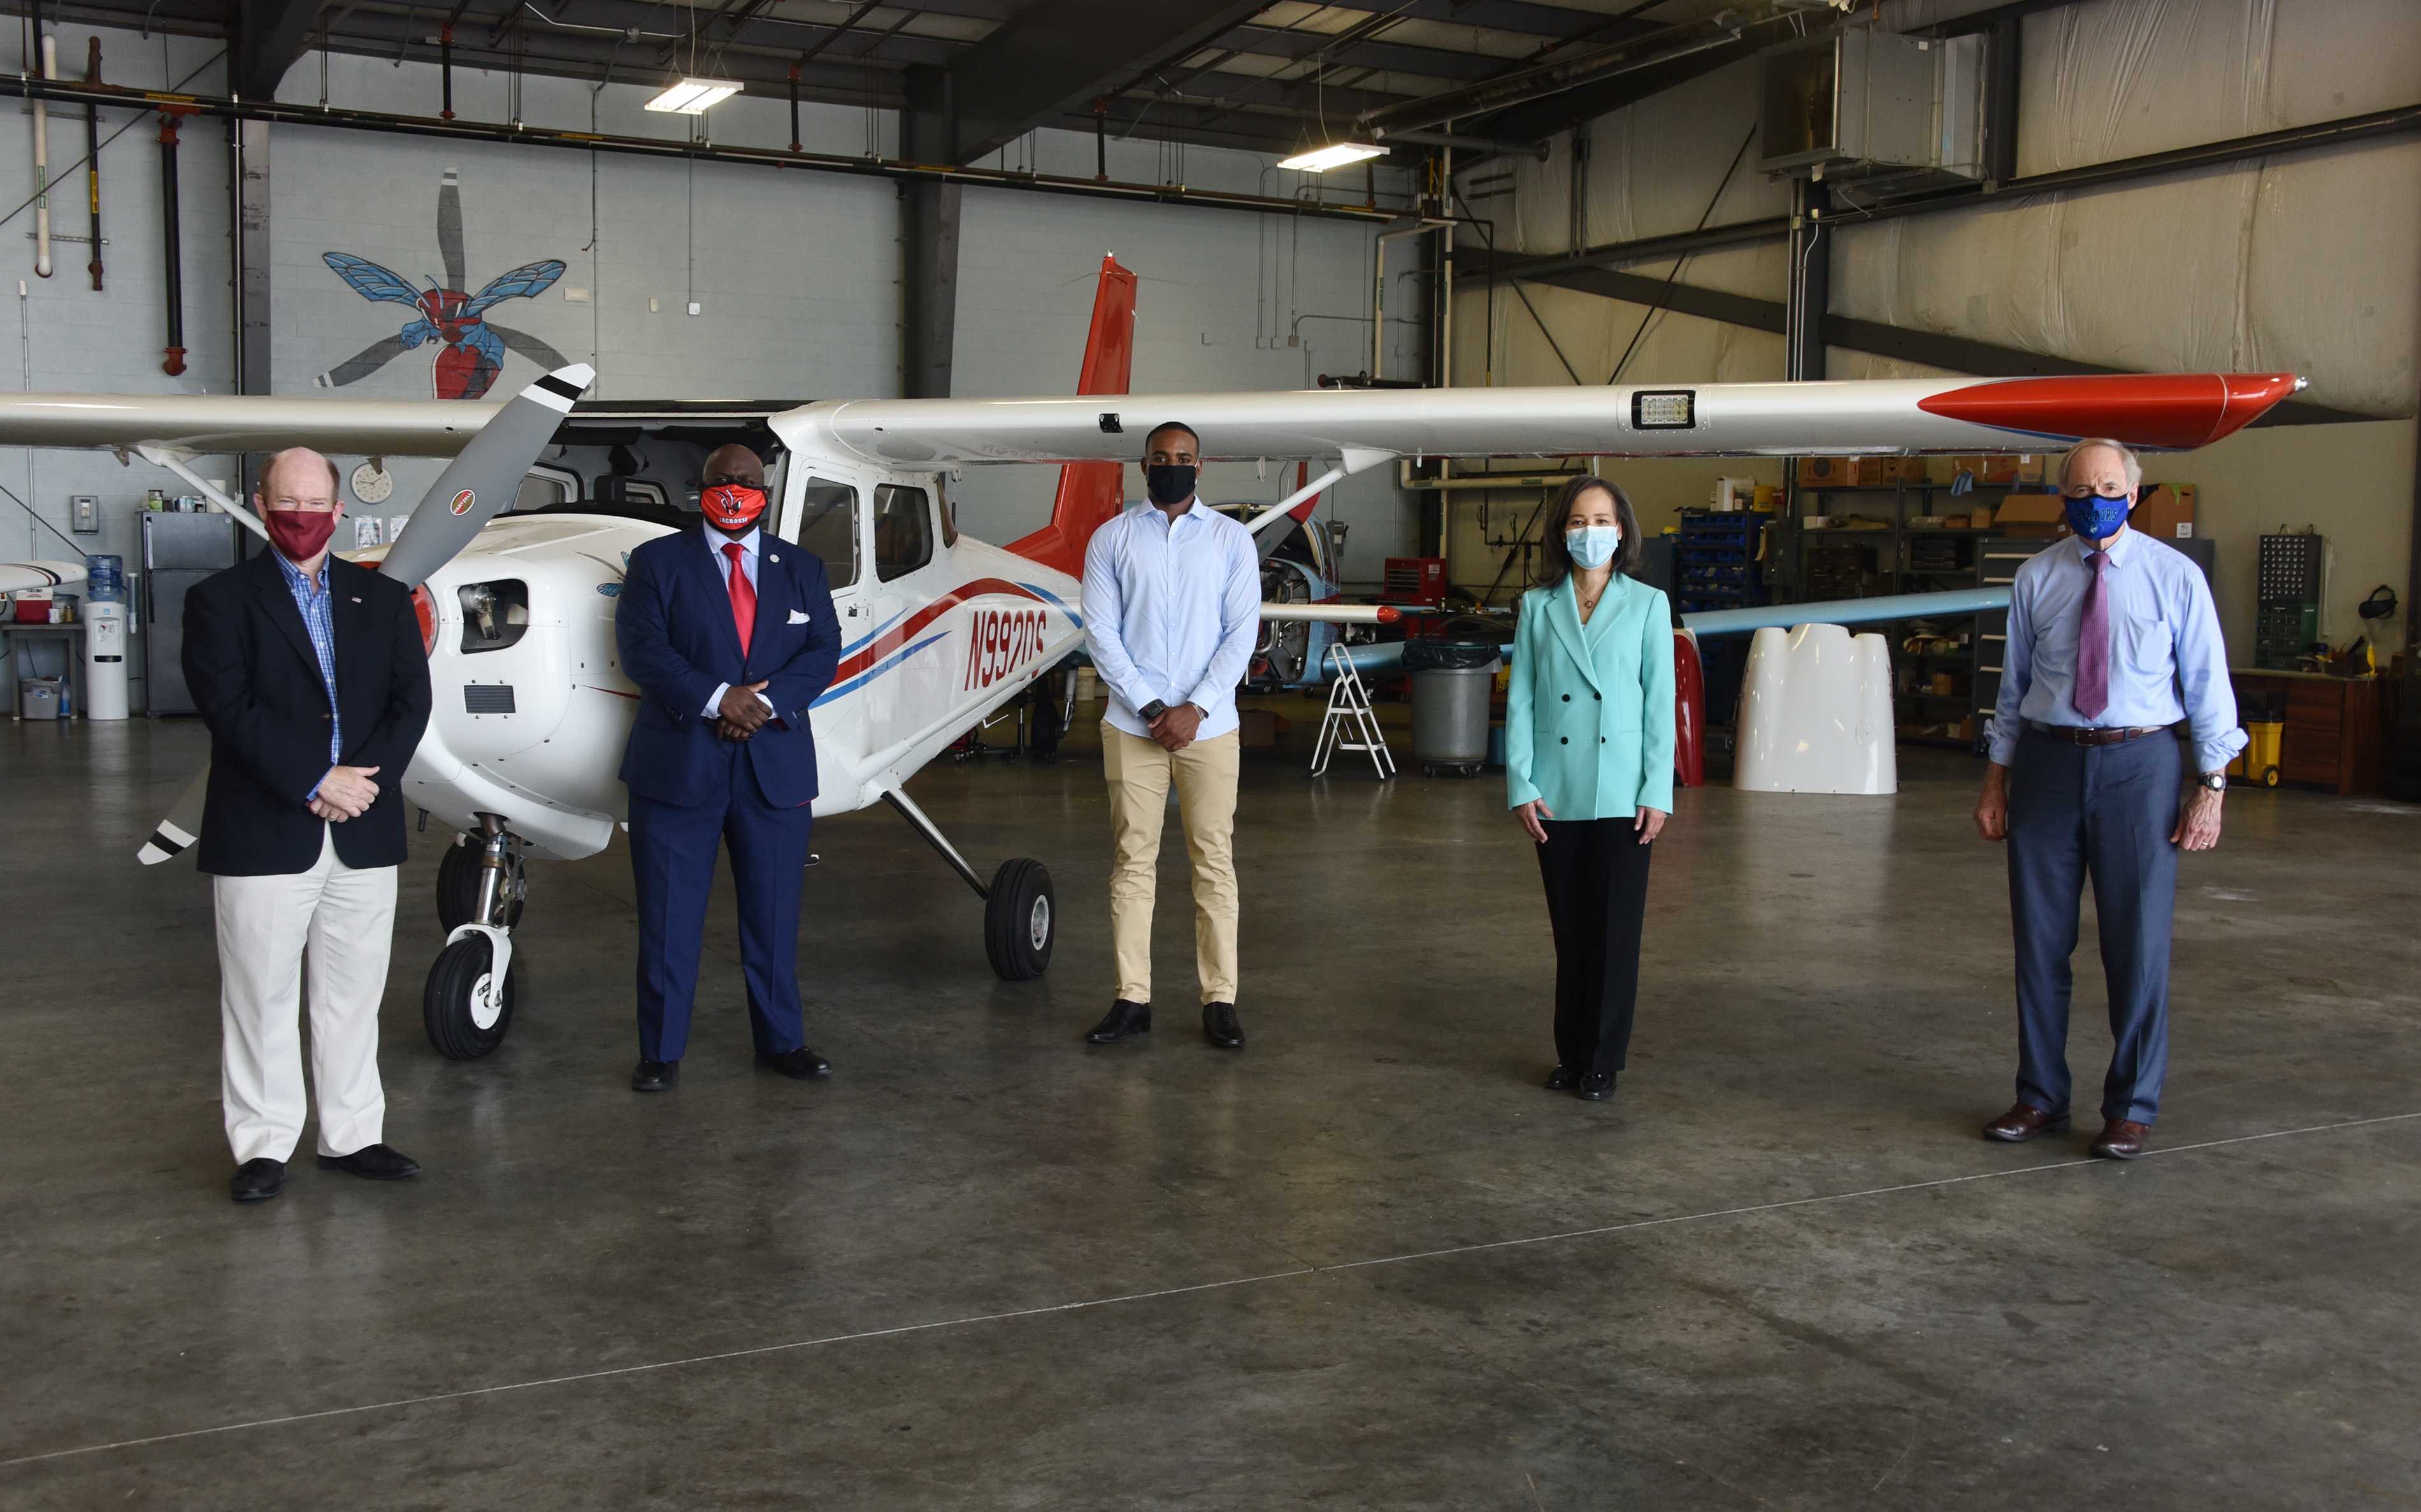 (L-r) U.S. Chris Coons, University President Tony Allen, Aviation freshman Tajay Kelly, U.S. Rep. Lisa Blunt Rochester, and U.S. Sen. Tom Carper pose with adherence to social distancing, after an event in the Daniel Coons Hanger at the Delaware Airpark where the talked about The Flight Act and how it would benefit Del State's Aviation Program.  